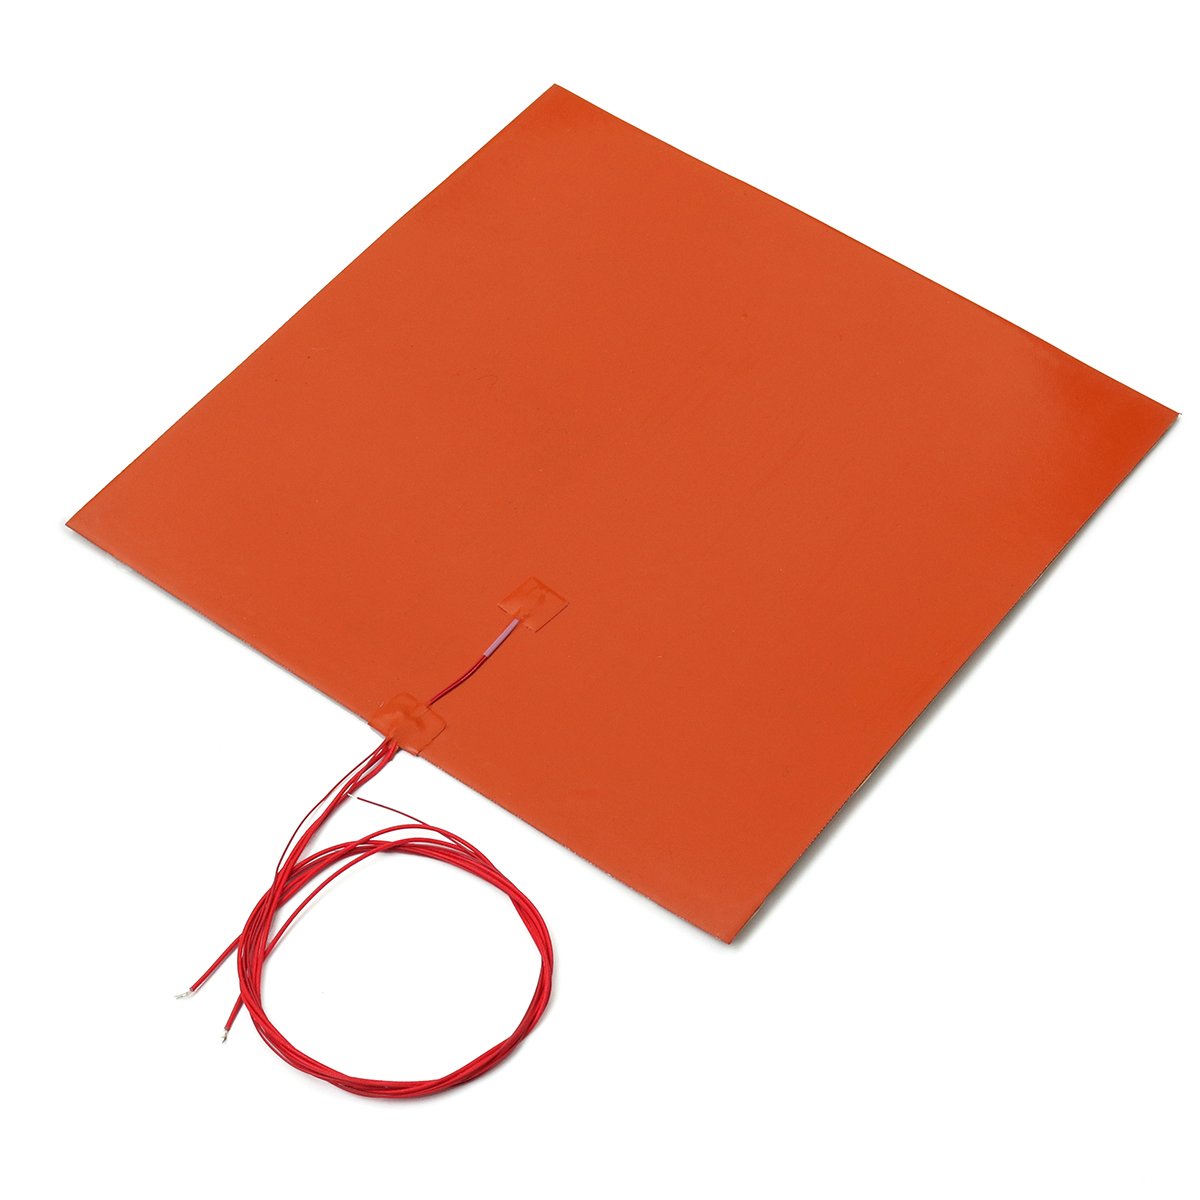 1400w 240V 400*400mm Silicone Heater Bed Pad For 3D Printer Without Hole 2